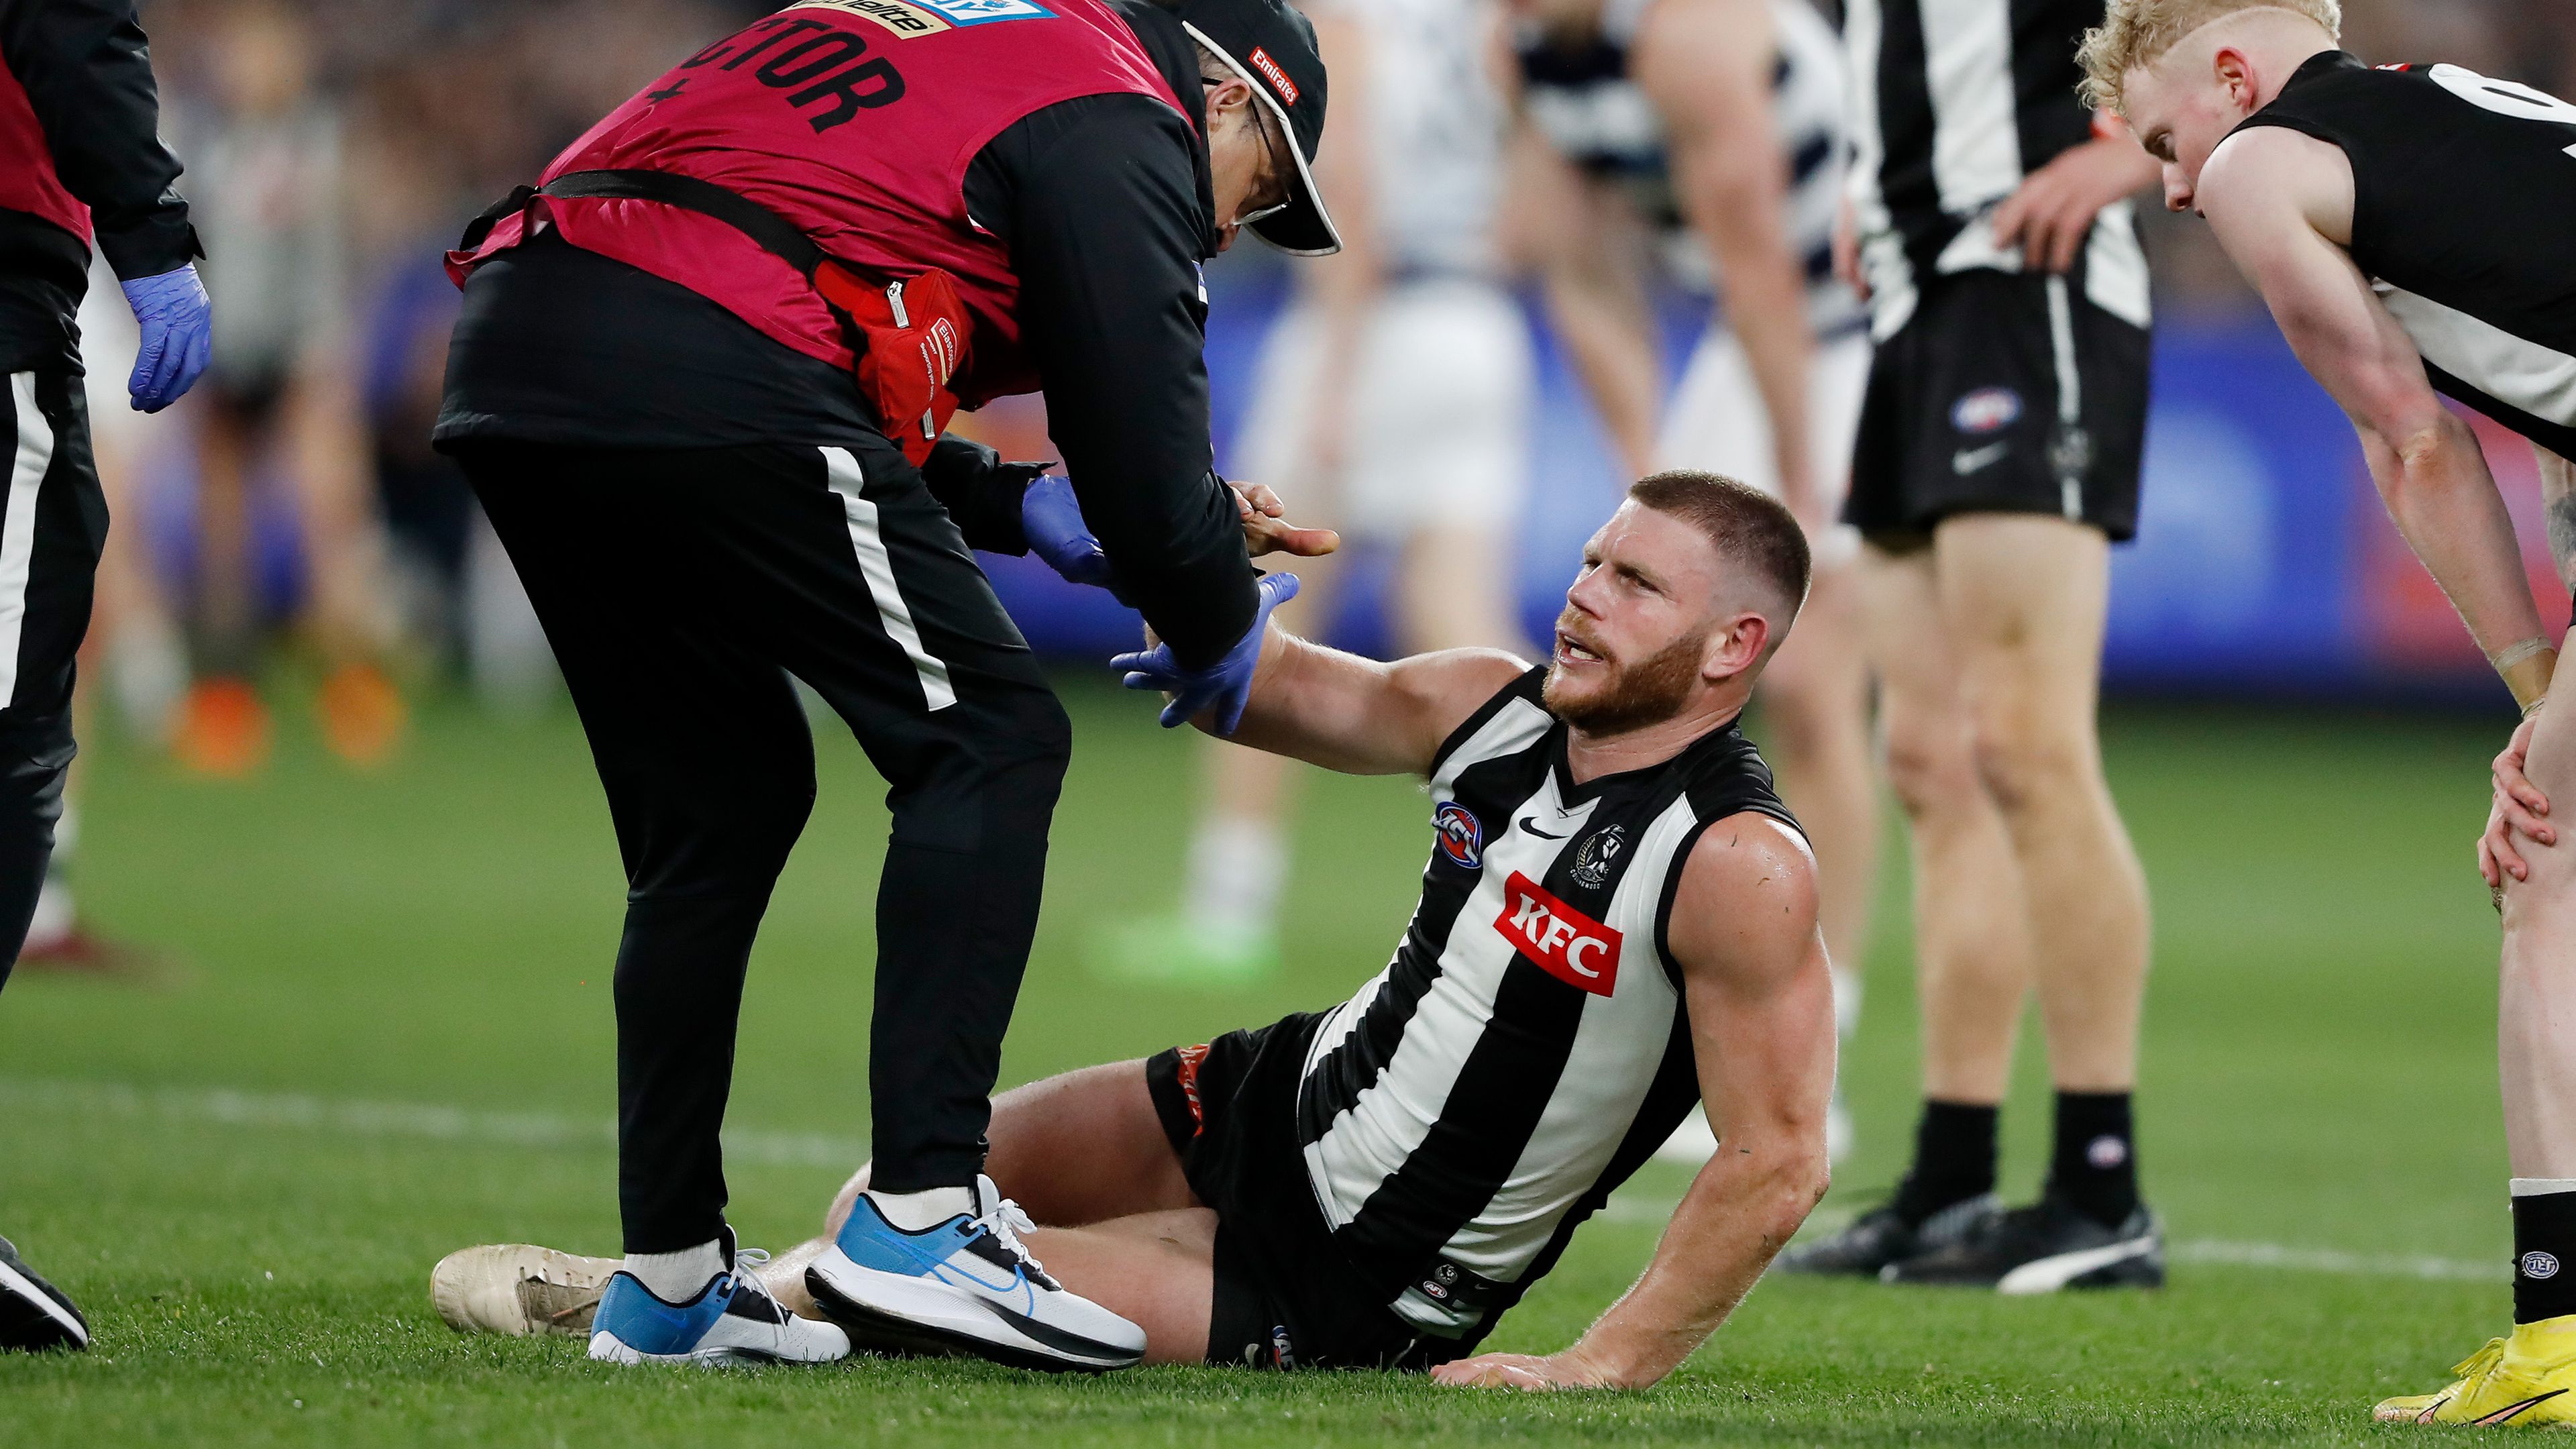 Shattered Collingwood star Taylor Adams reveals beautiful moment with fan after loss